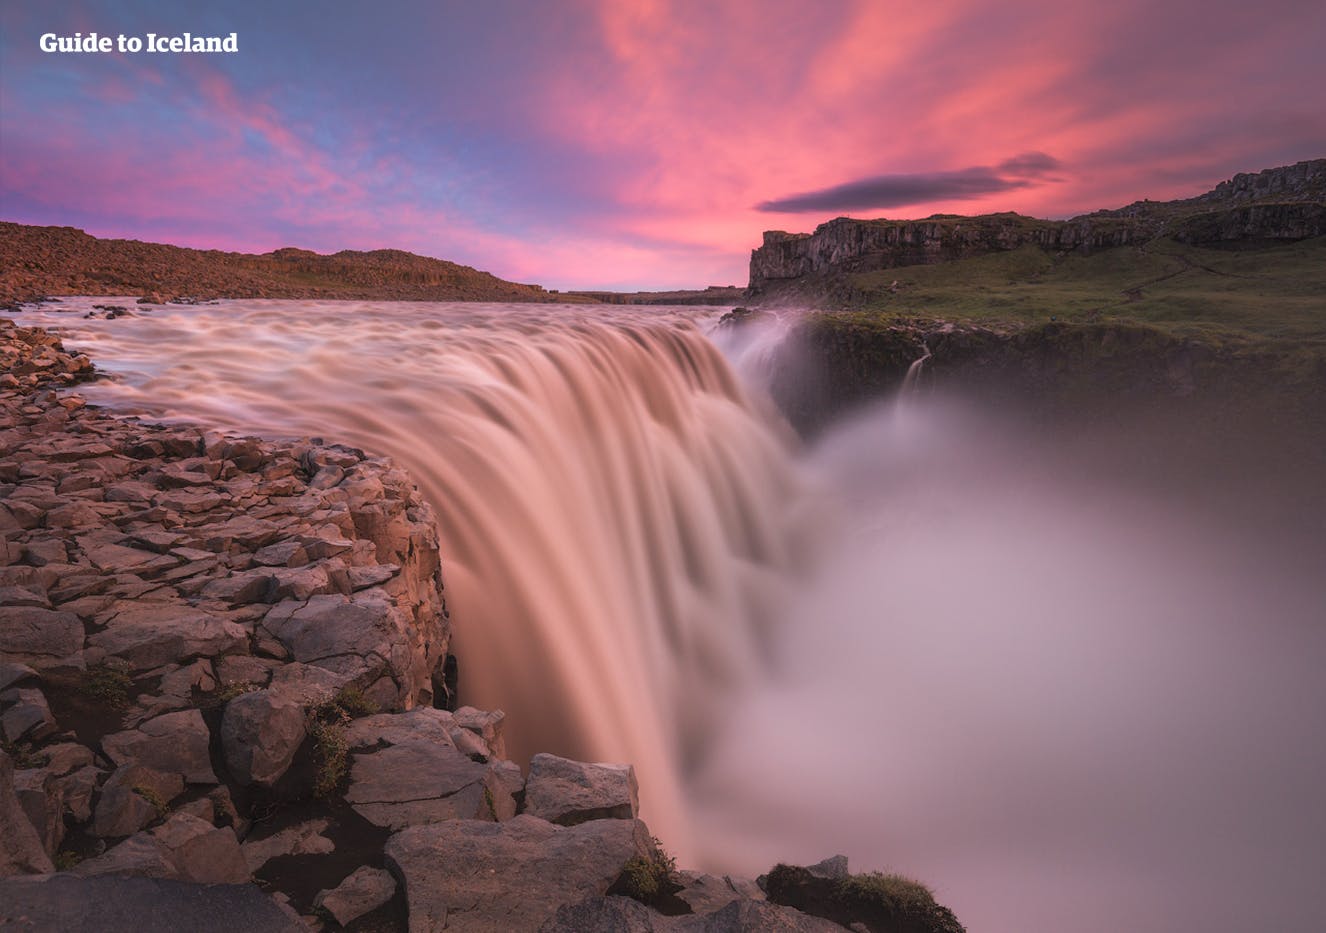 Dettifoss is Europe's most powerful waterfall.